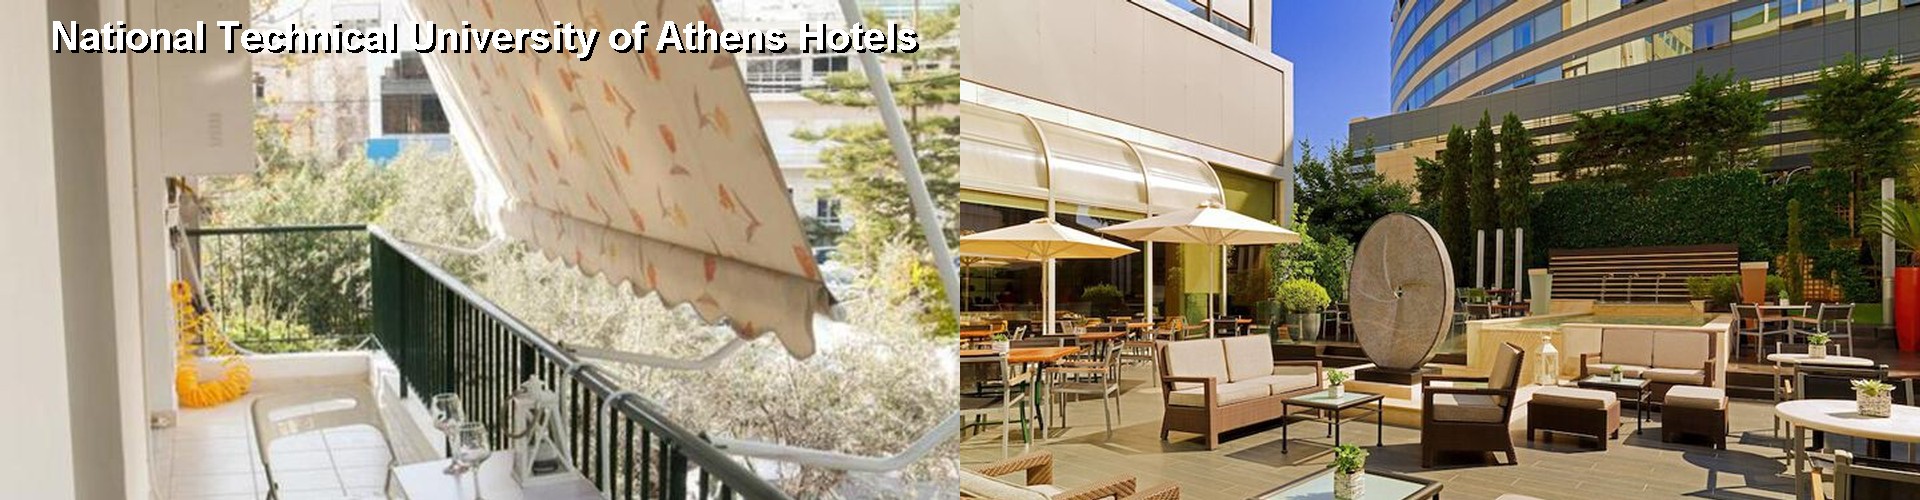 5 Best Hotels near National Technical University of Athens